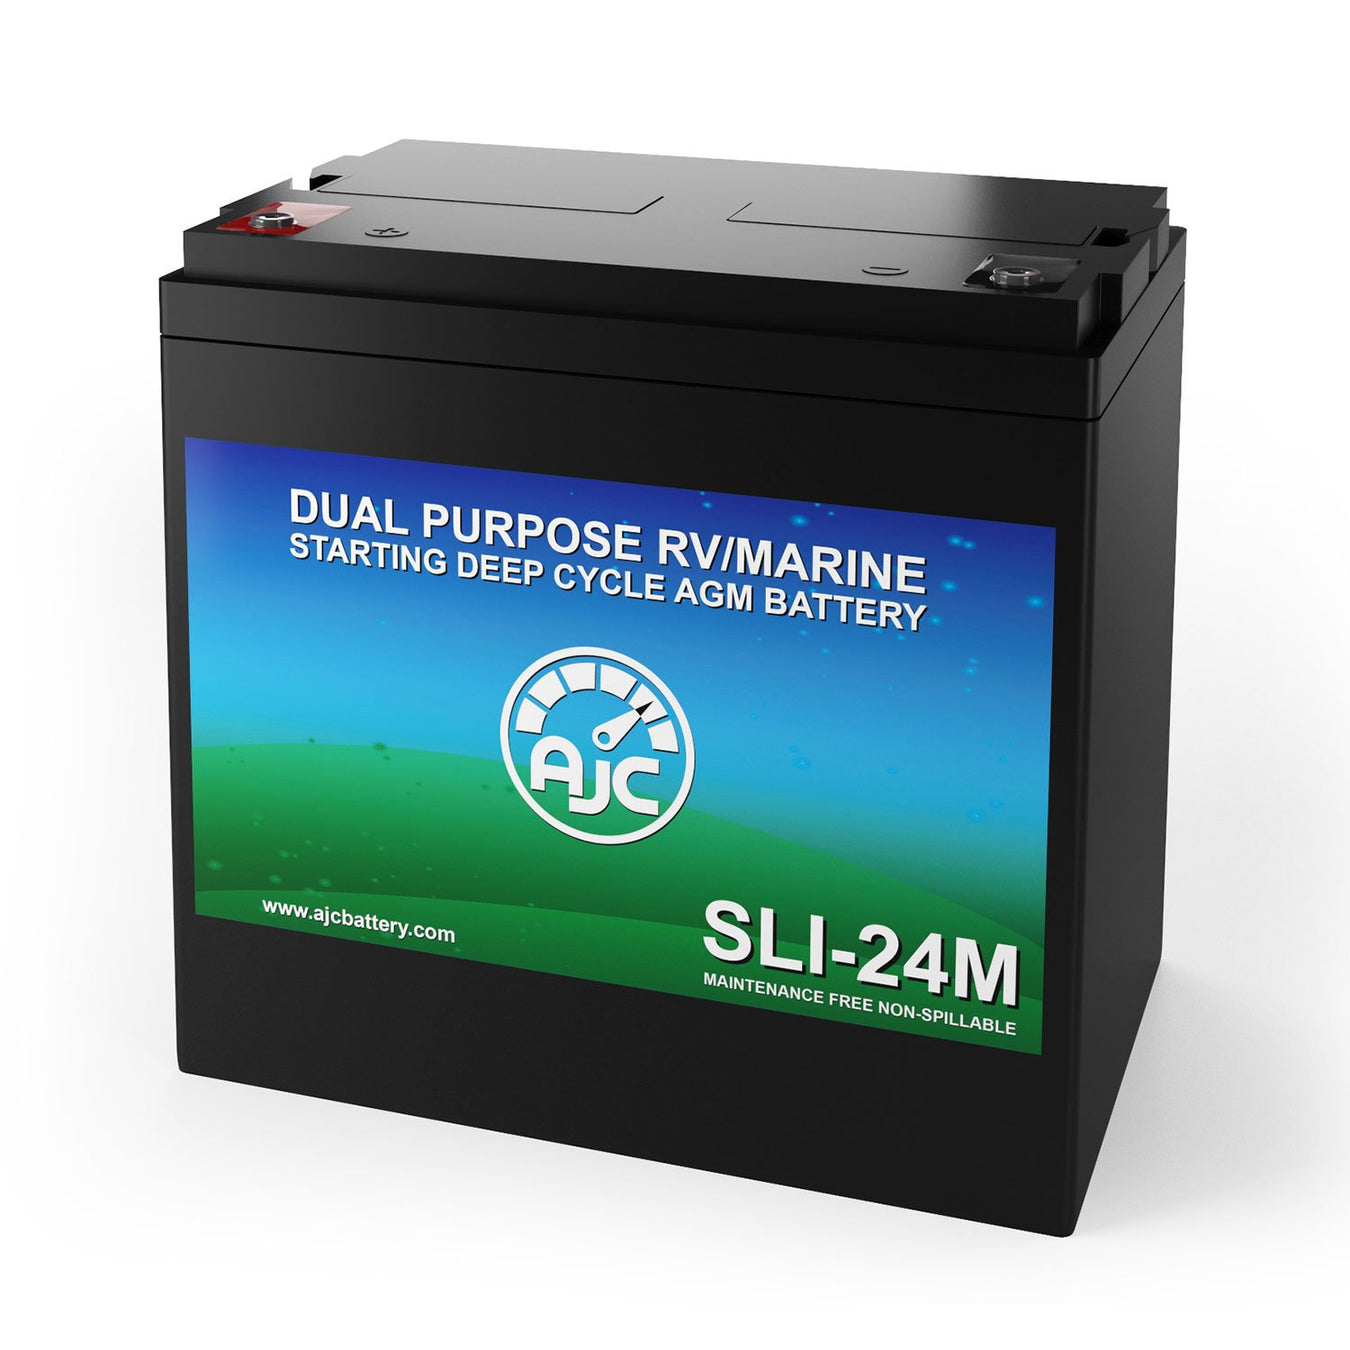 Deep Cycle Marine and Boat Batteries